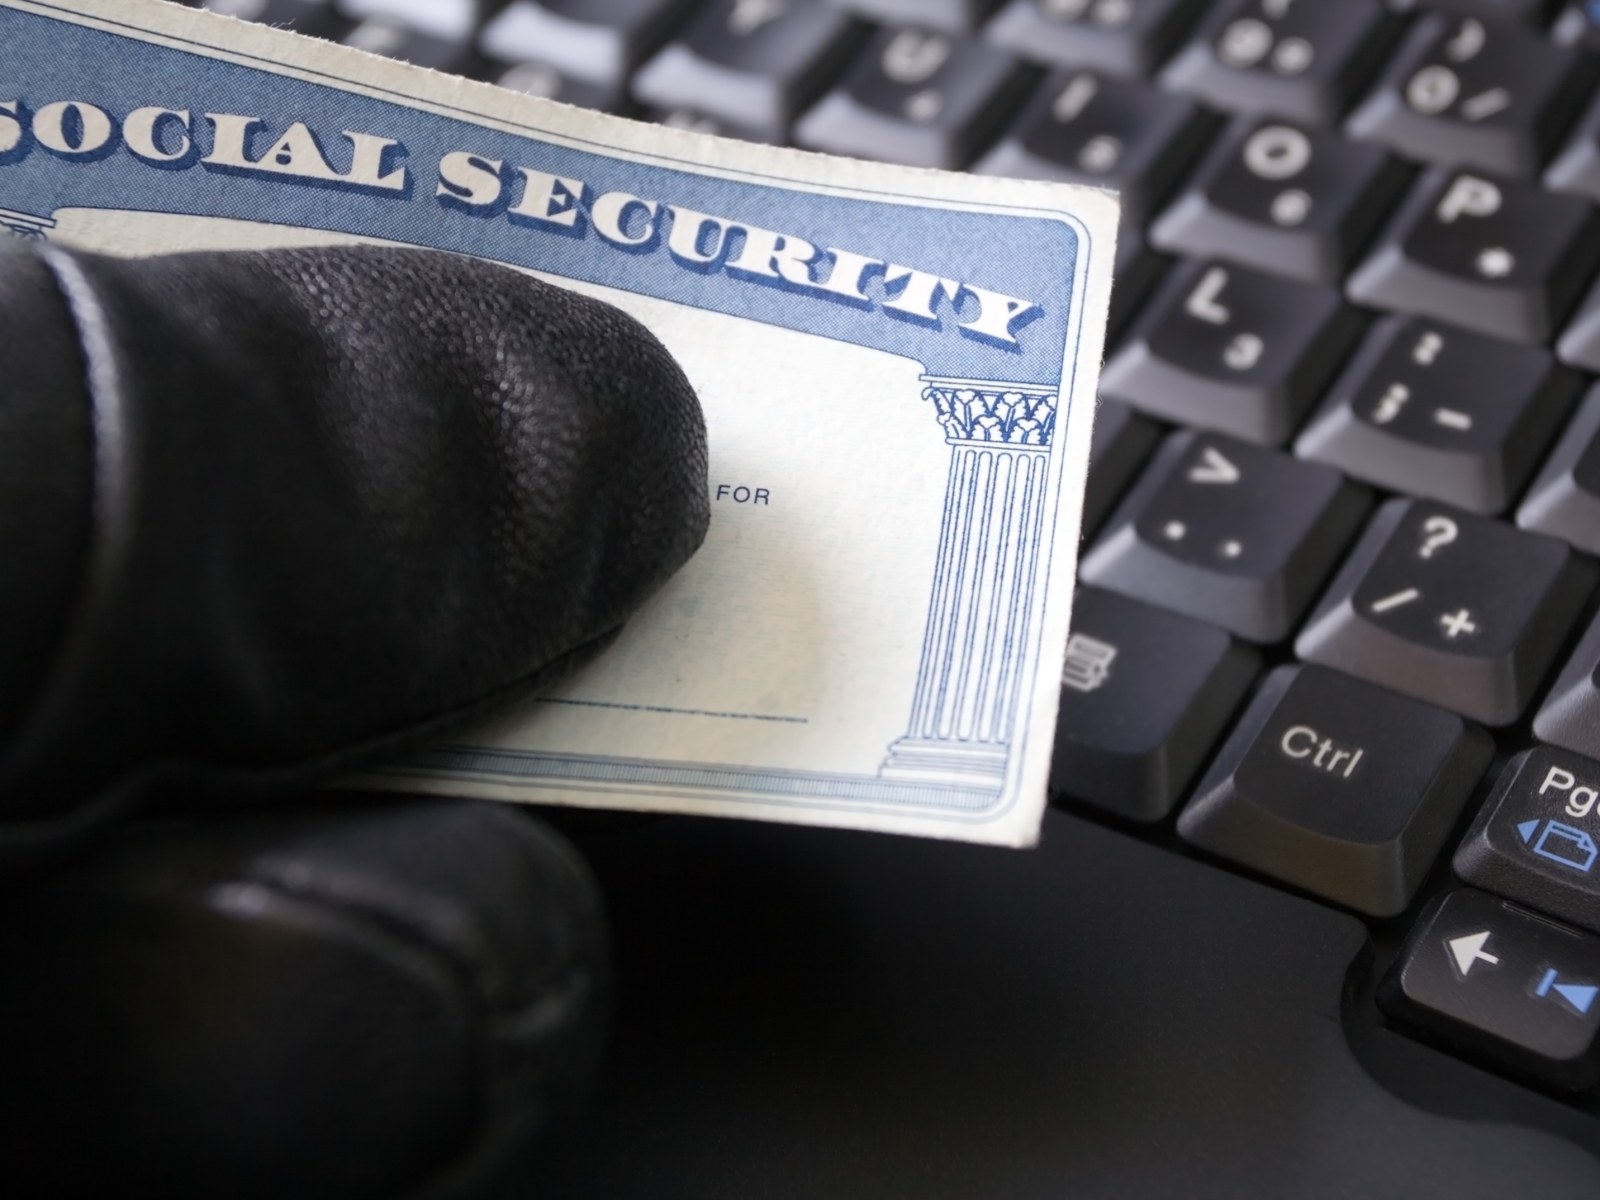 Social Security Warning: Millions of Americans Urged to Beware of Scam Calls